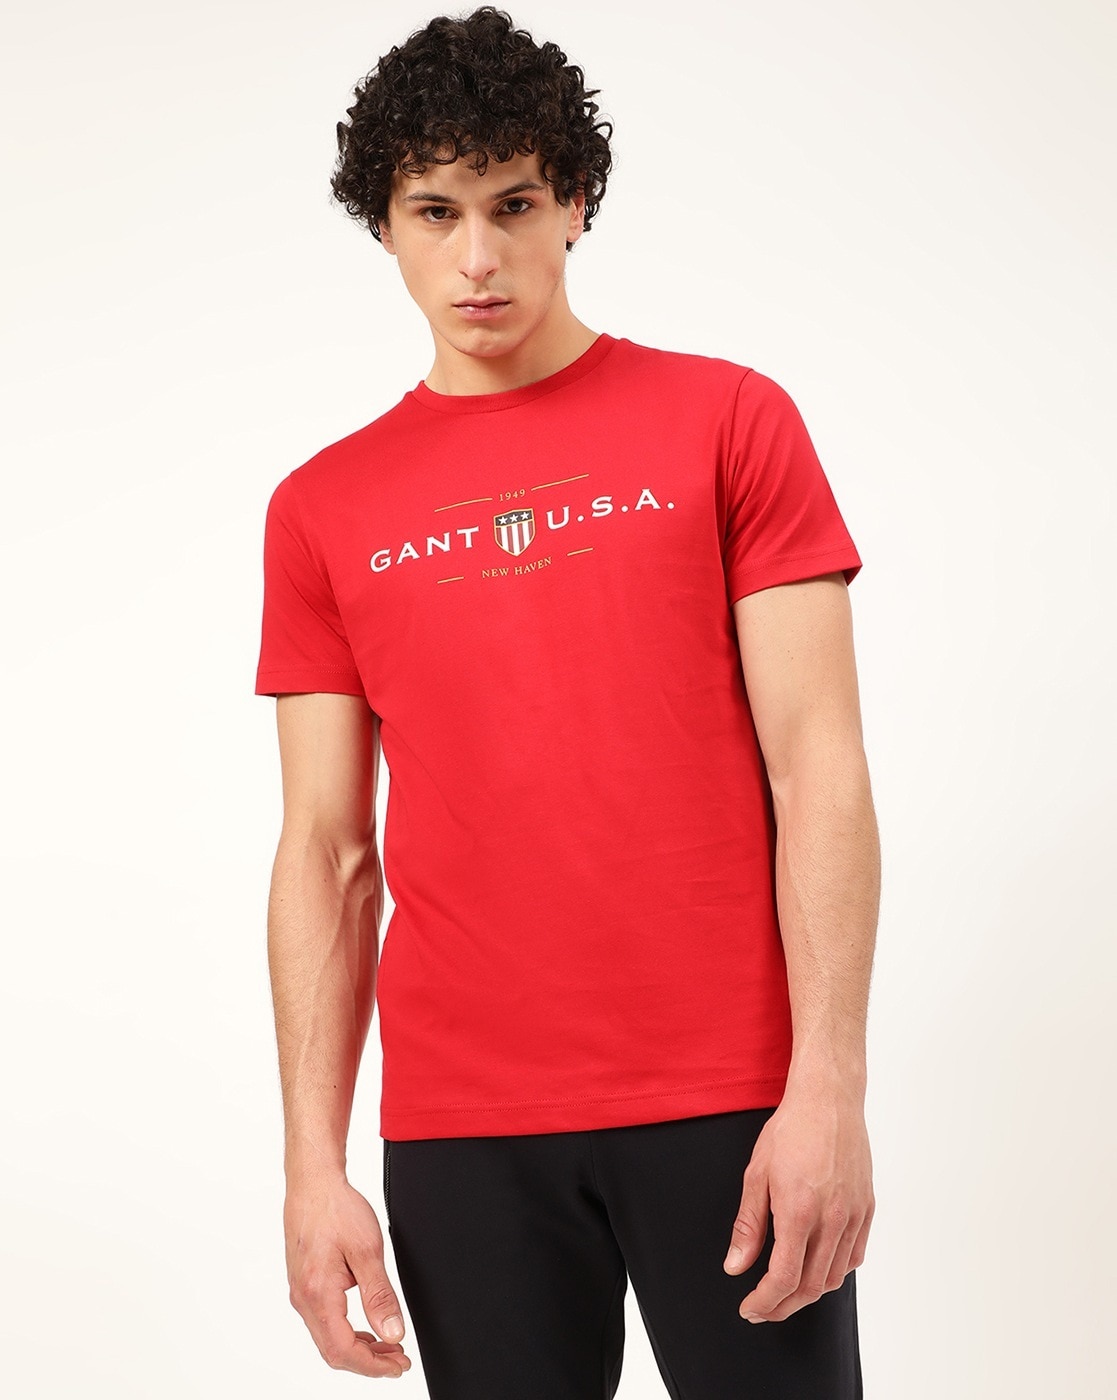 hule Tag ud Australsk person Buy Red Tshirts for Men by Gant Online | Ajio.com